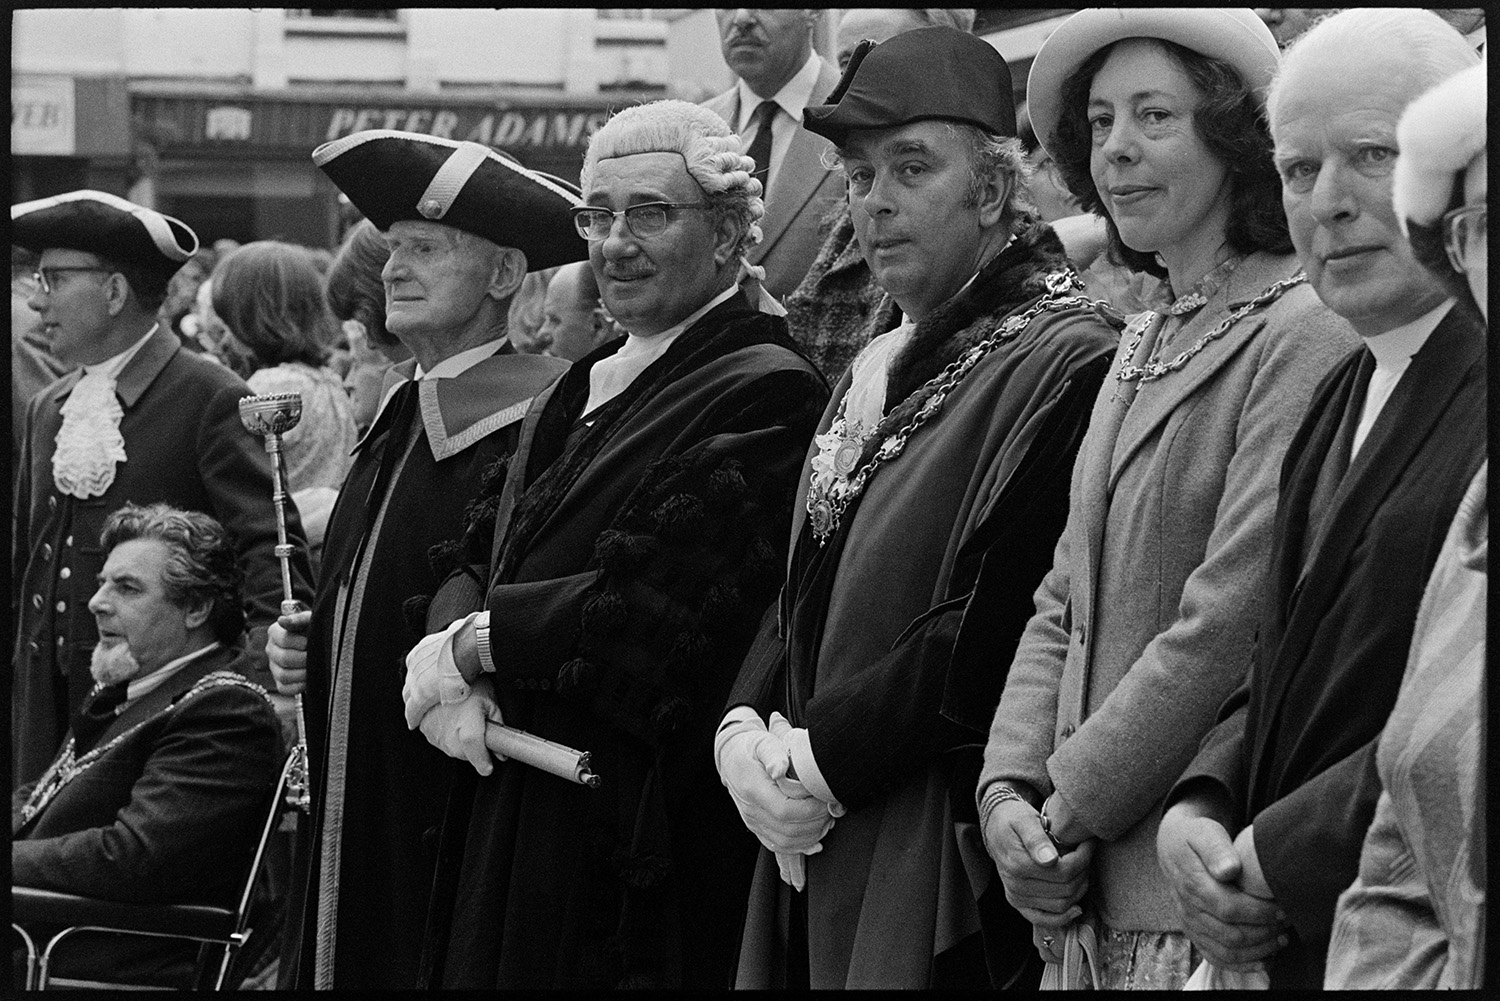 Mayors, wives and dignitaries in square looking at Mayfair parade. 
[Mayors, dignitaries and wives in Torrington square, watching the Mayfair parade. Dr Cramp is wearing his mayoral chain of office and a bicorne hat.]